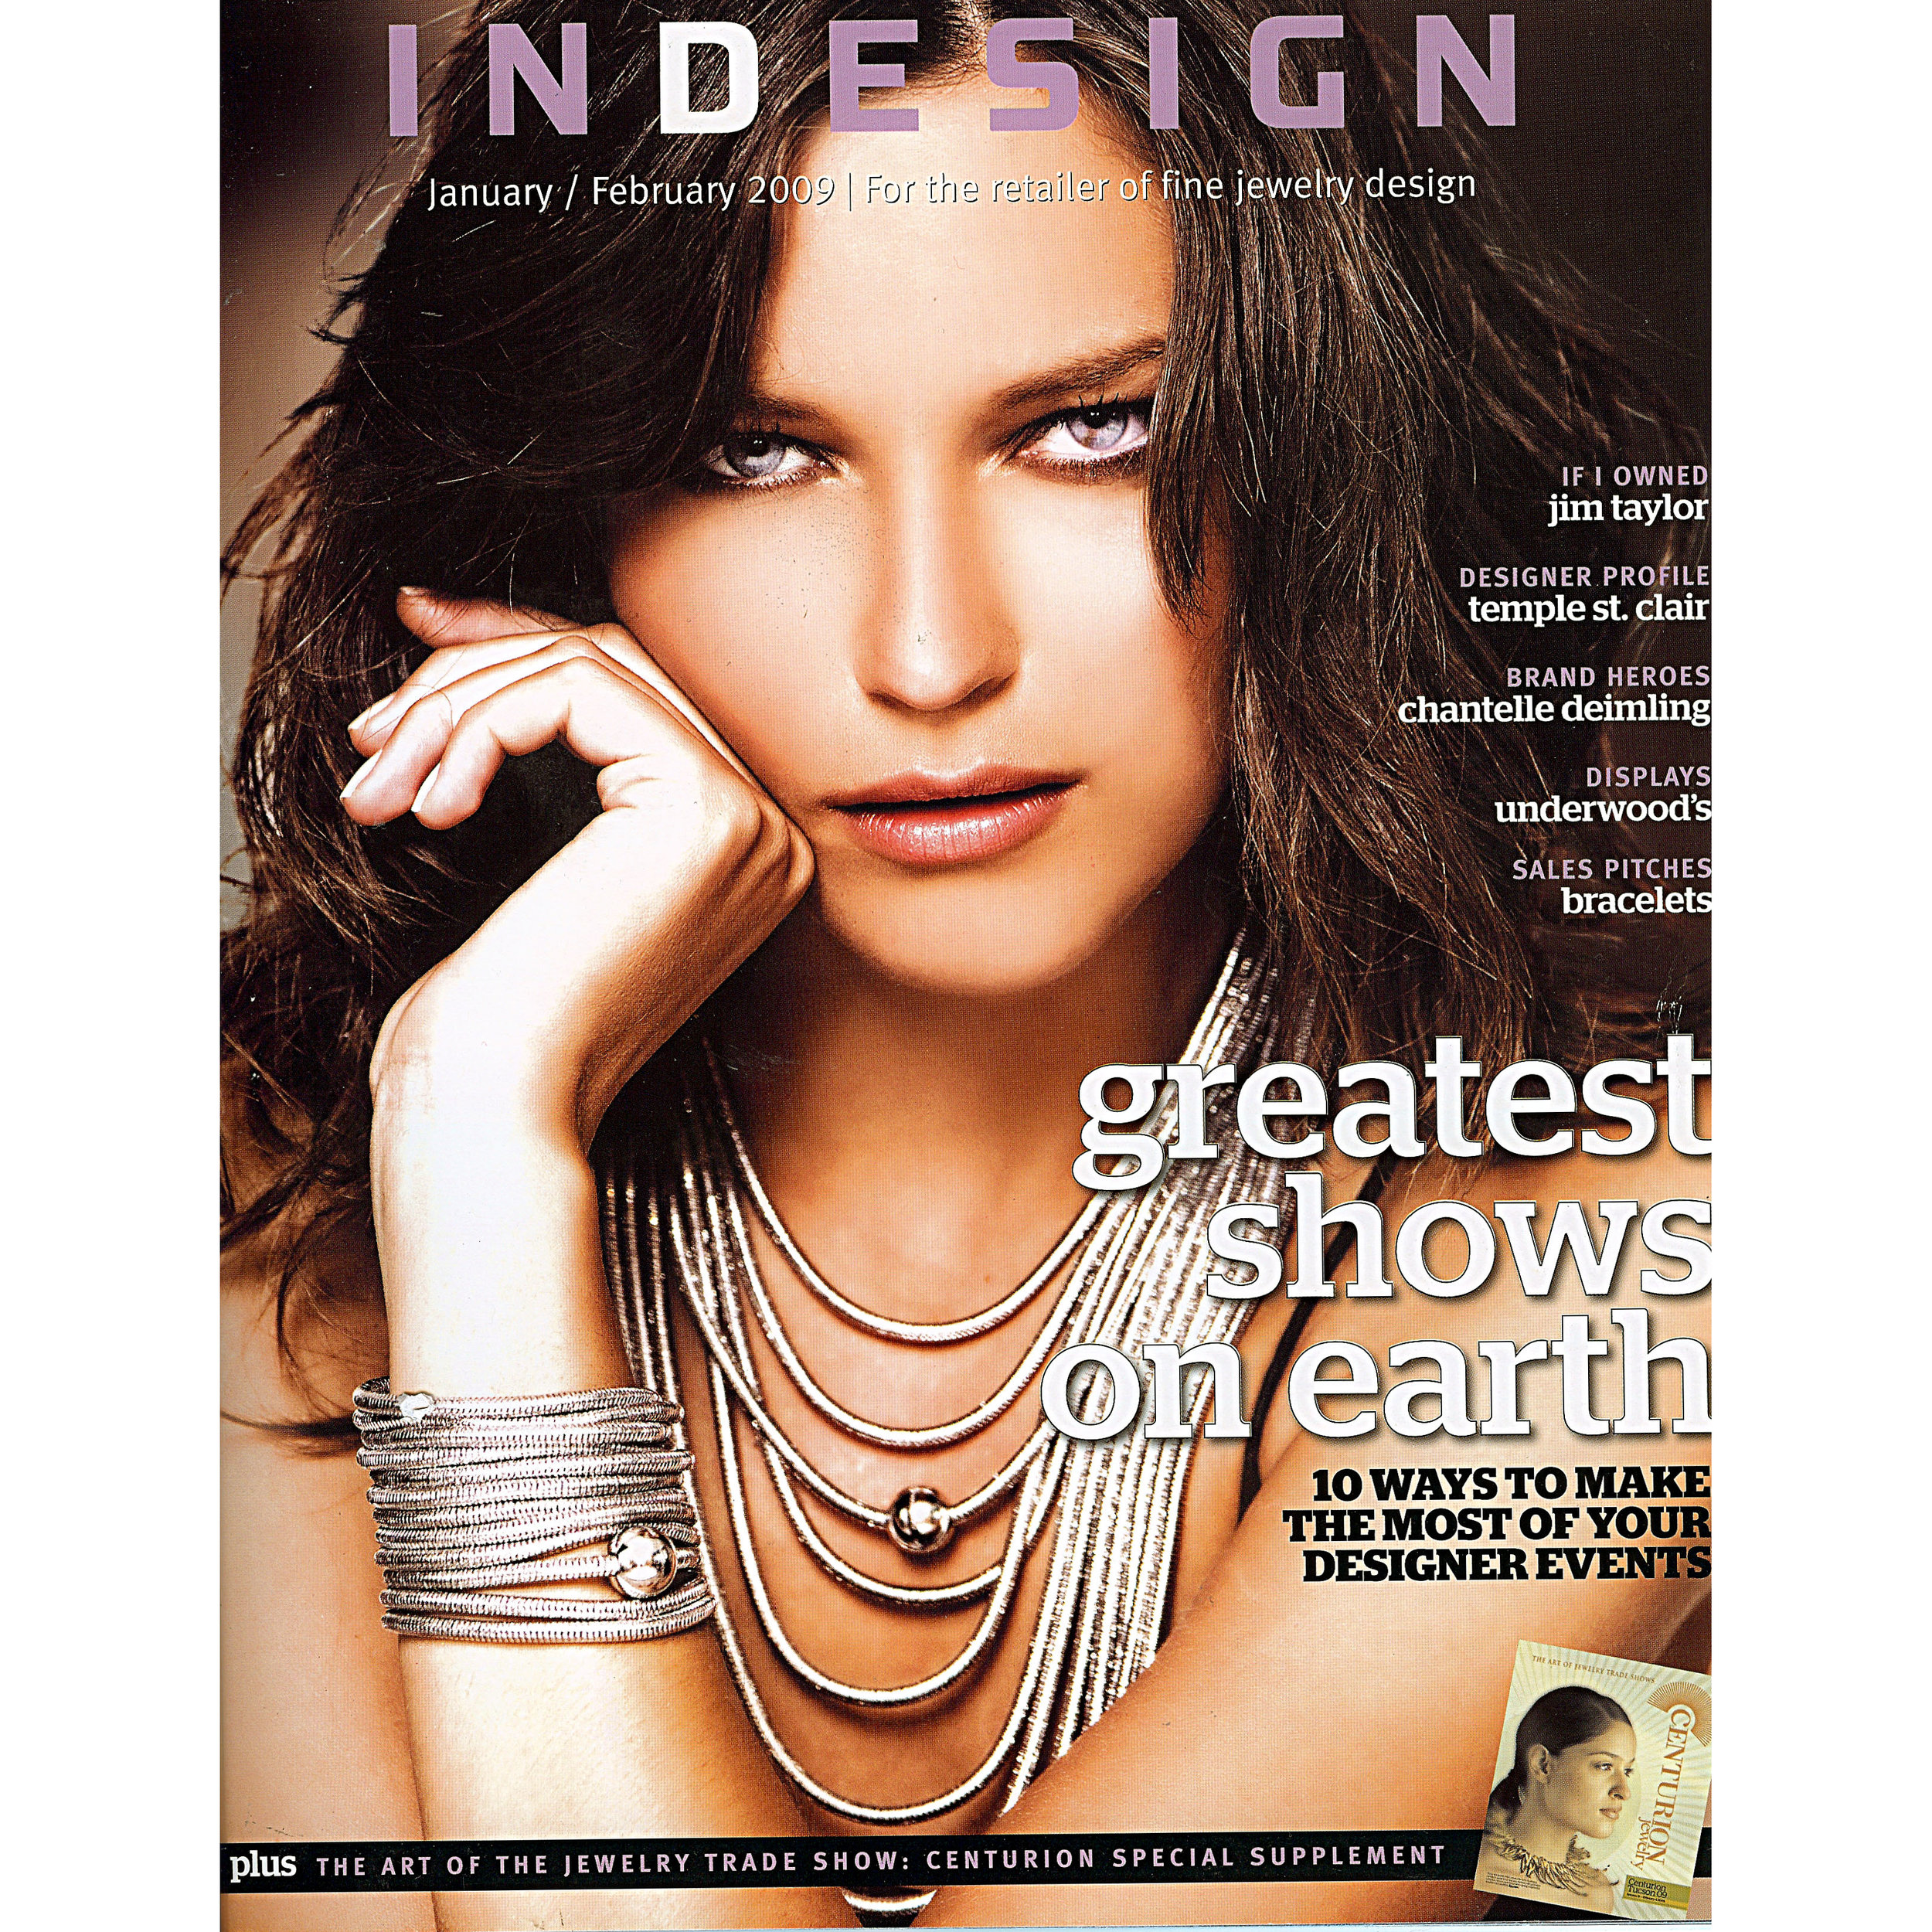 InDesign, "The Tomboy". January 2009